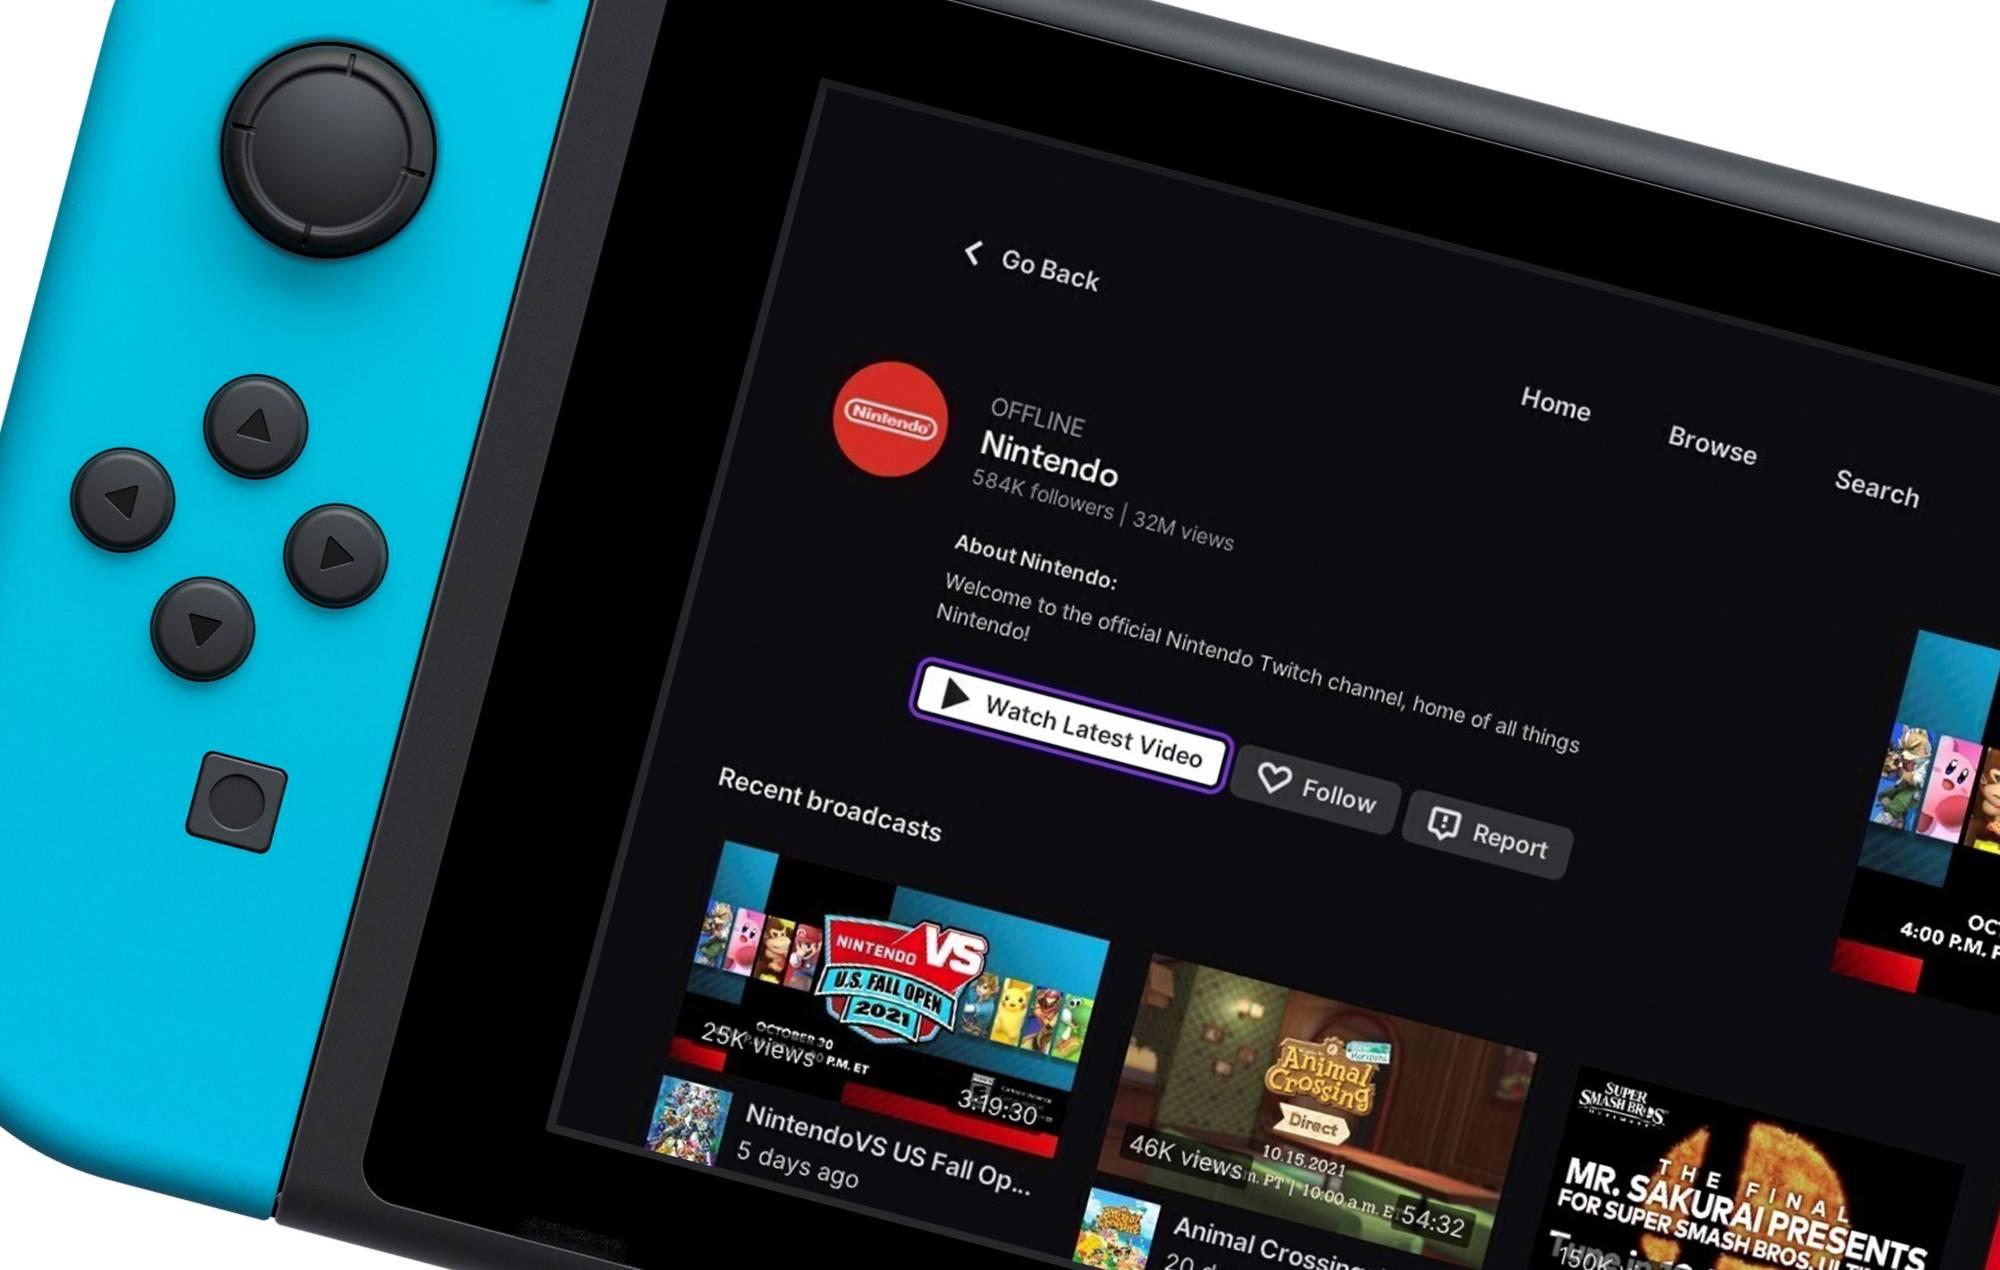 svinge romanforfatter slogan You can now watch Twitch directly from your Nintendo Switch - GamesHub